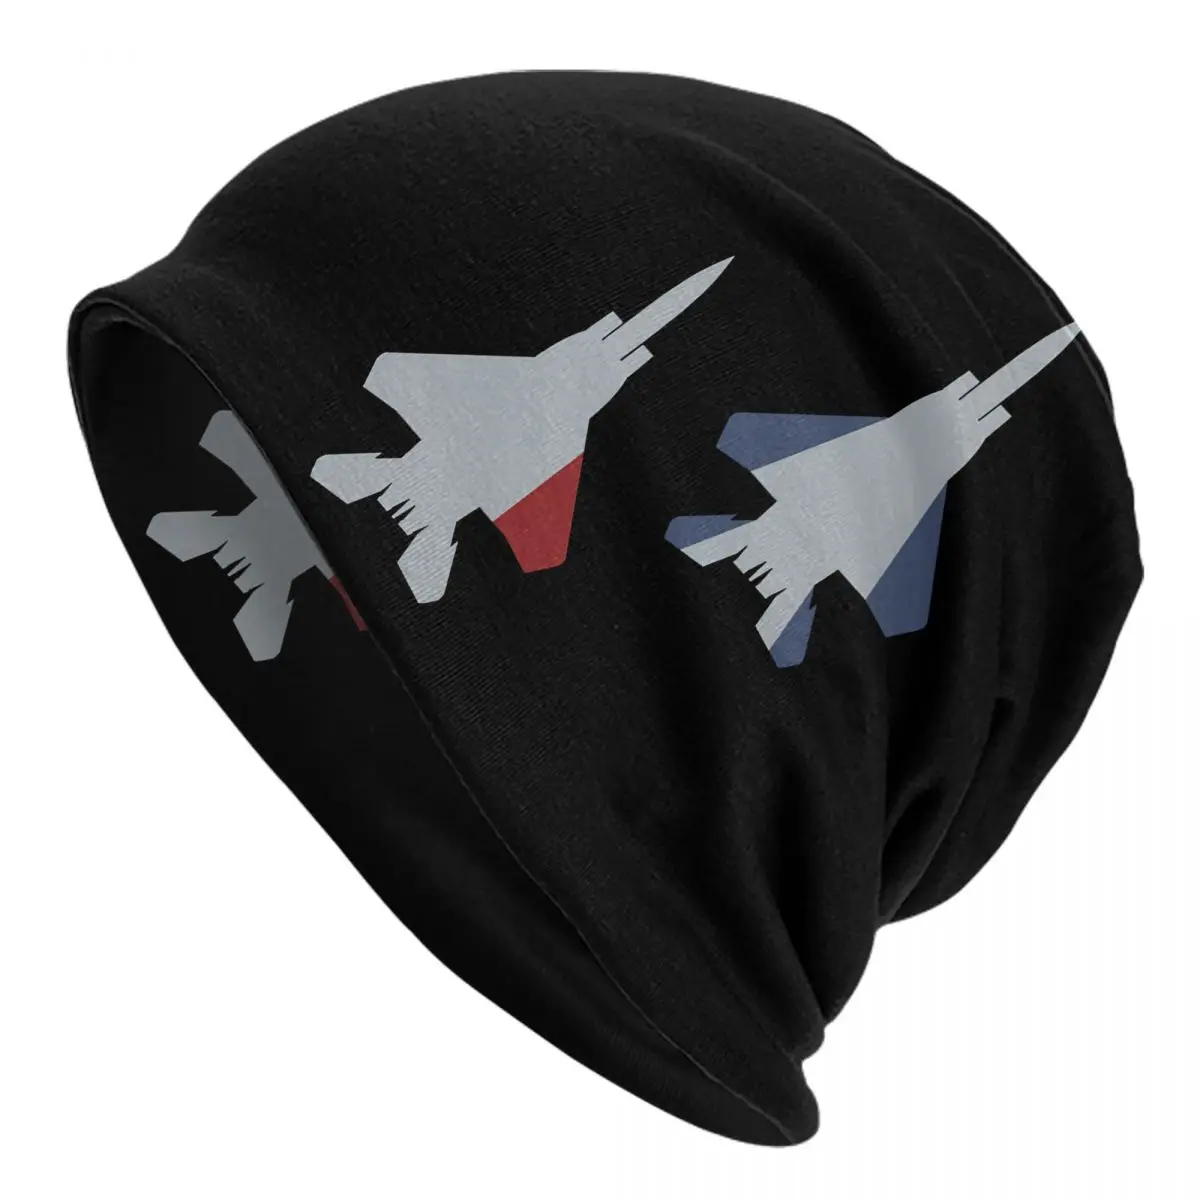 Ace Combat Galm Team Adult Men's Women's Knit Hat Keep warm winter knitted hat